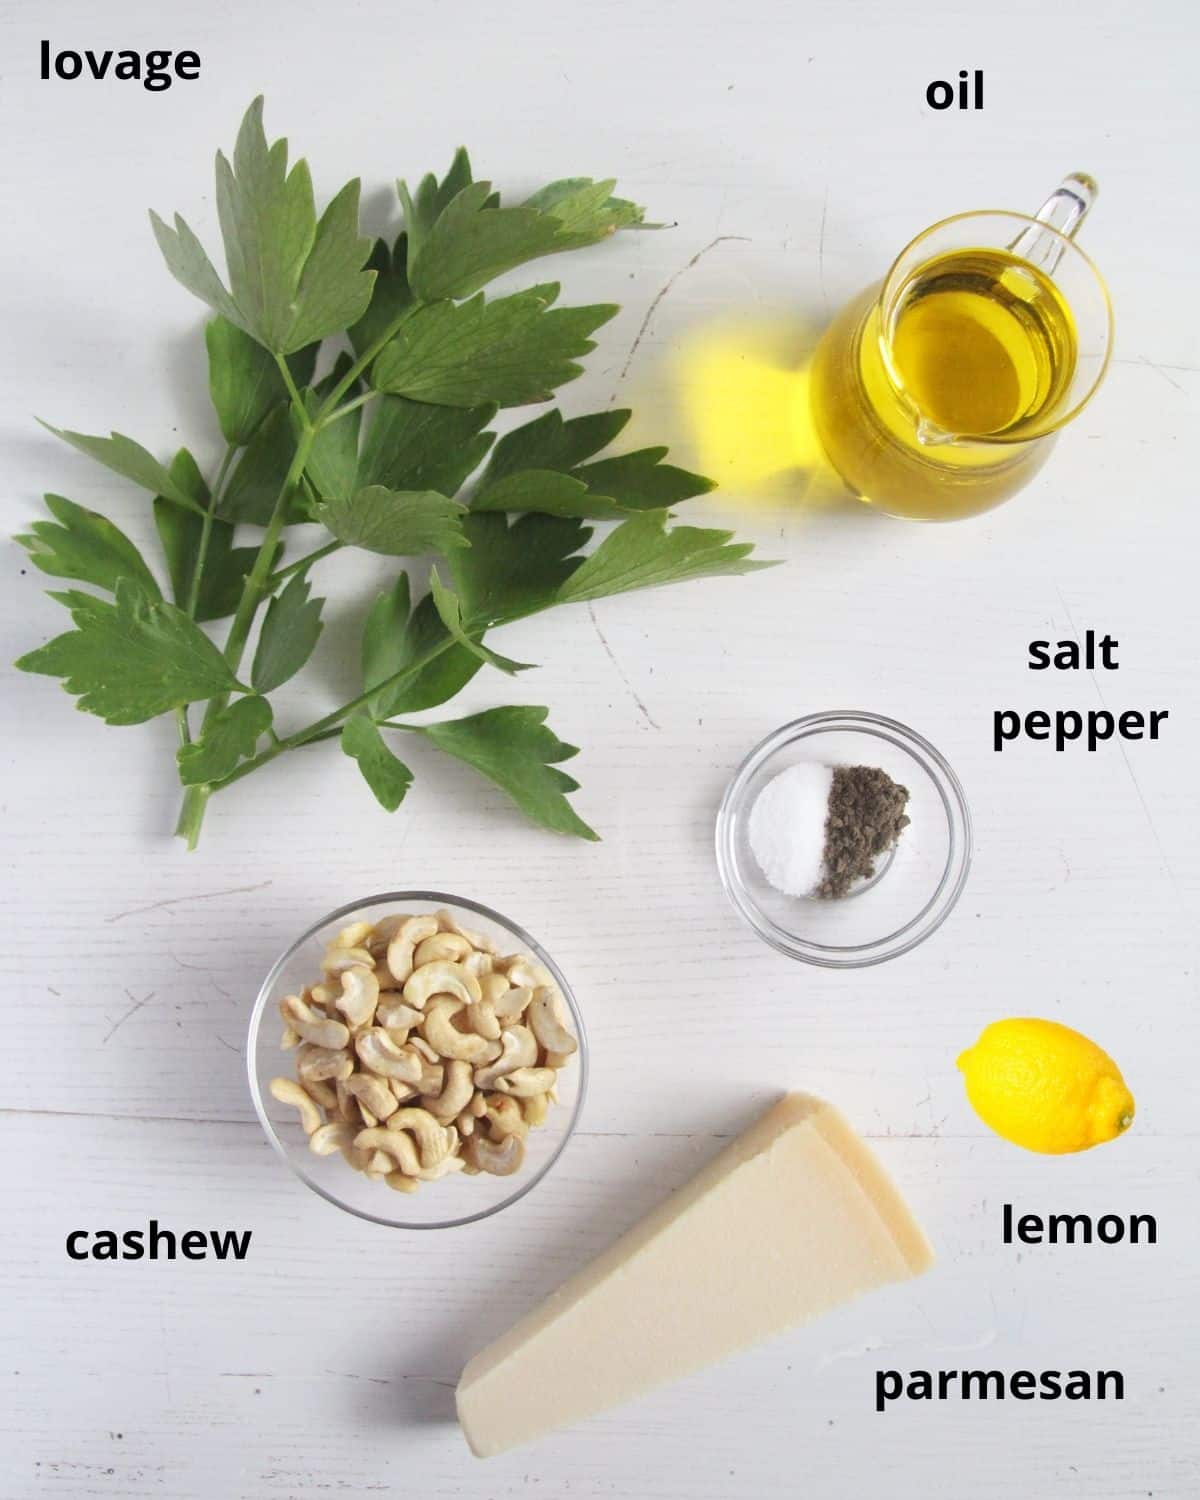 listed ingredients for making lovage pesto with cashews, parmesan and lemon.